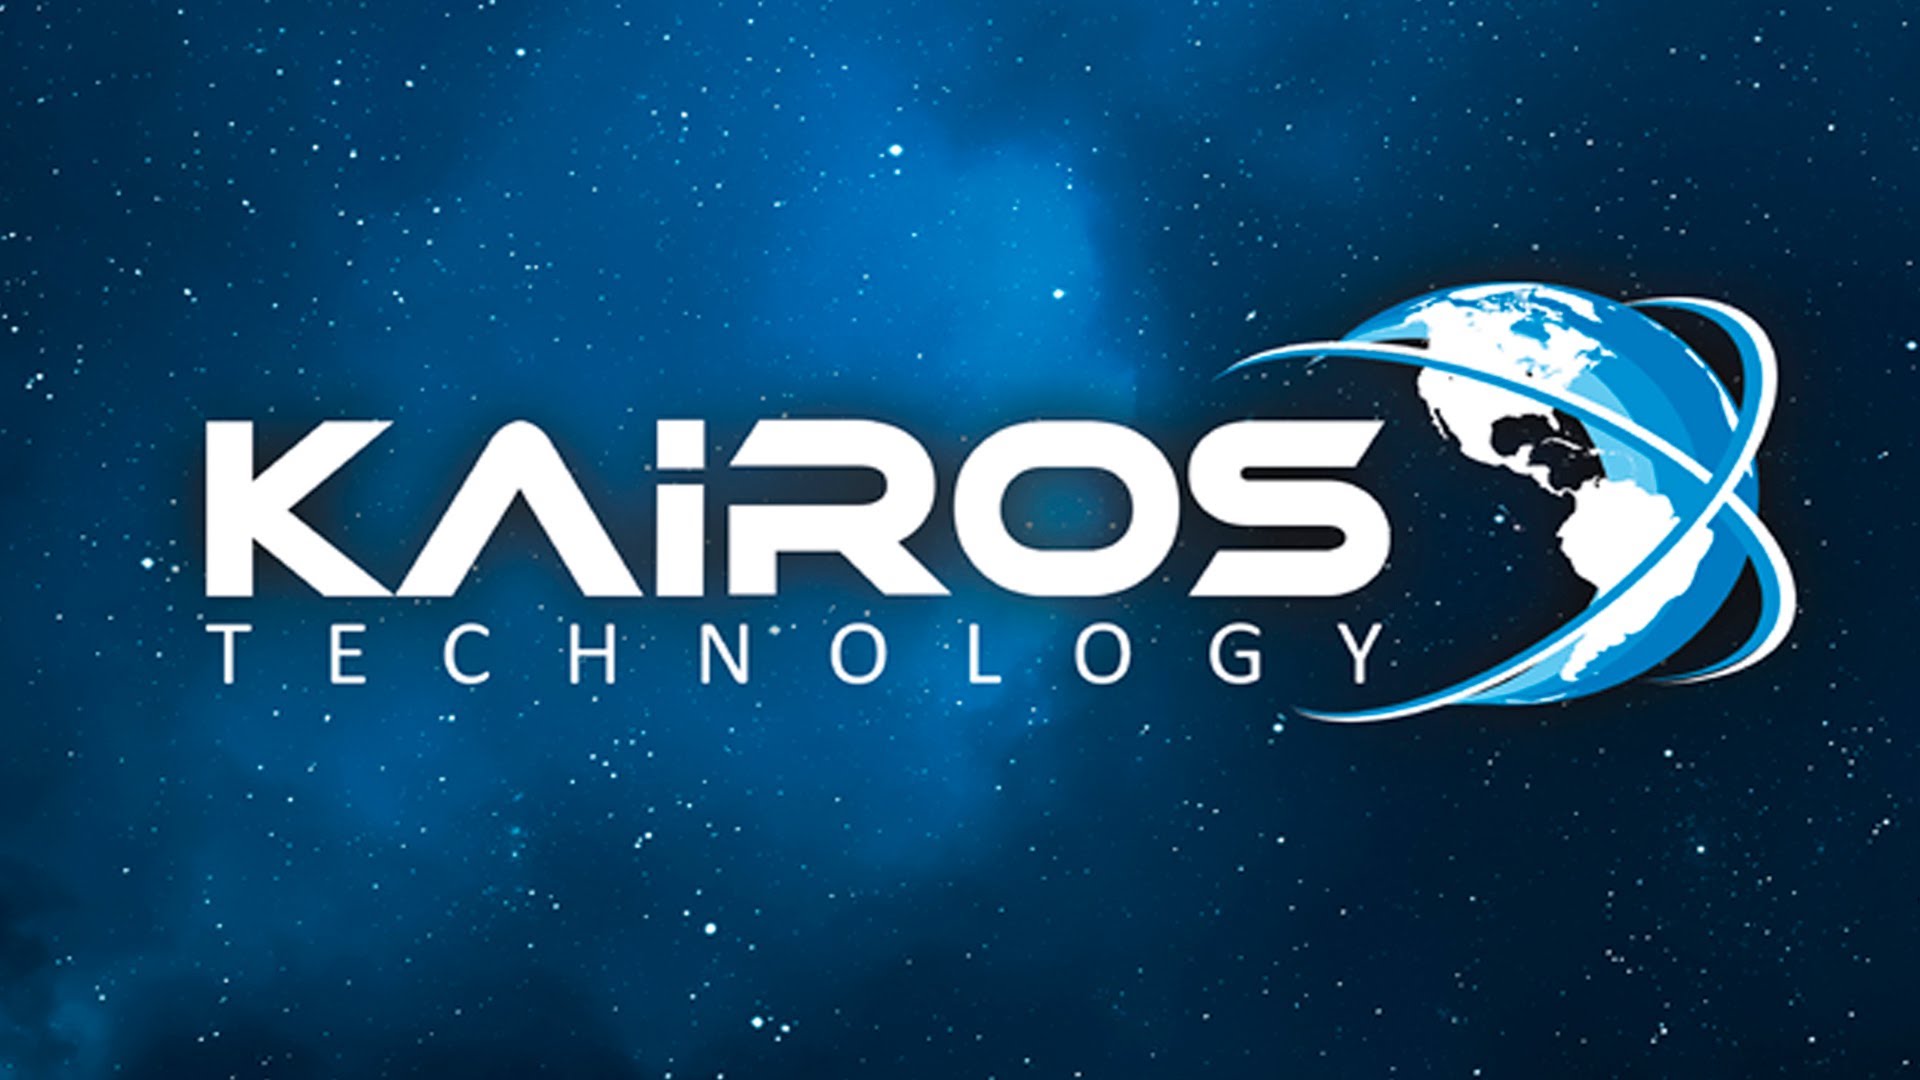 What Is Kairos Technology?